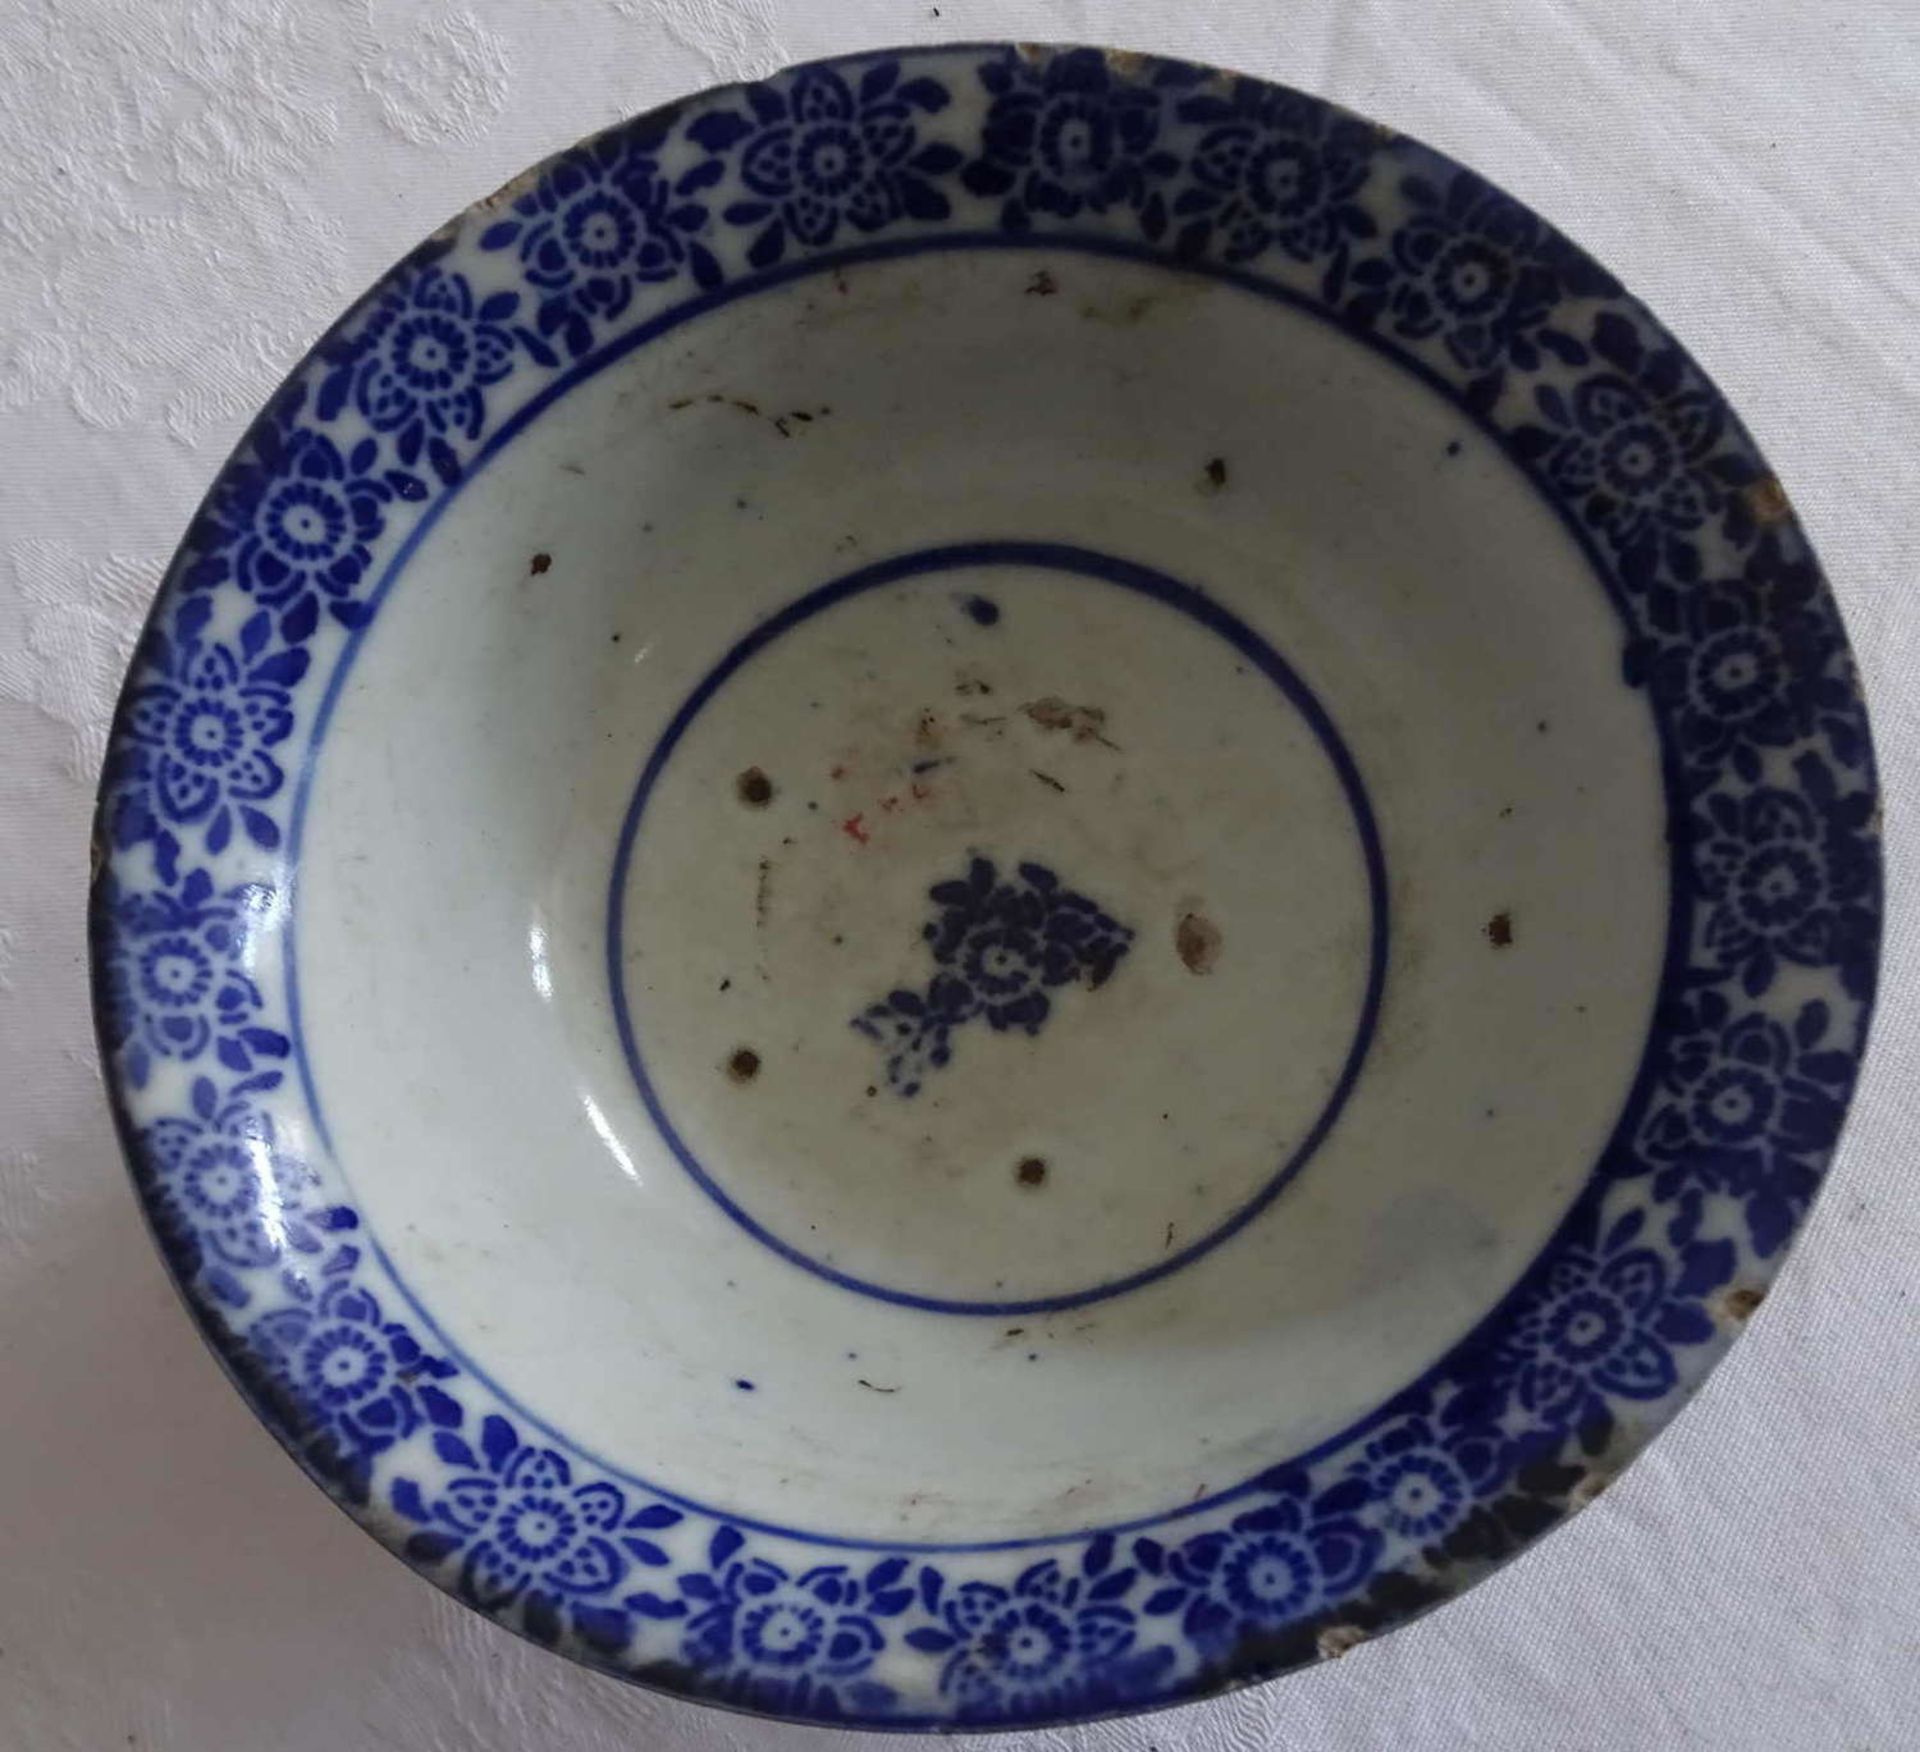 Ming Schale China, Durchmesser ca. 13,5 cm, mit Chip.Ming bowl China, diameter approx. 13.5 cm, with